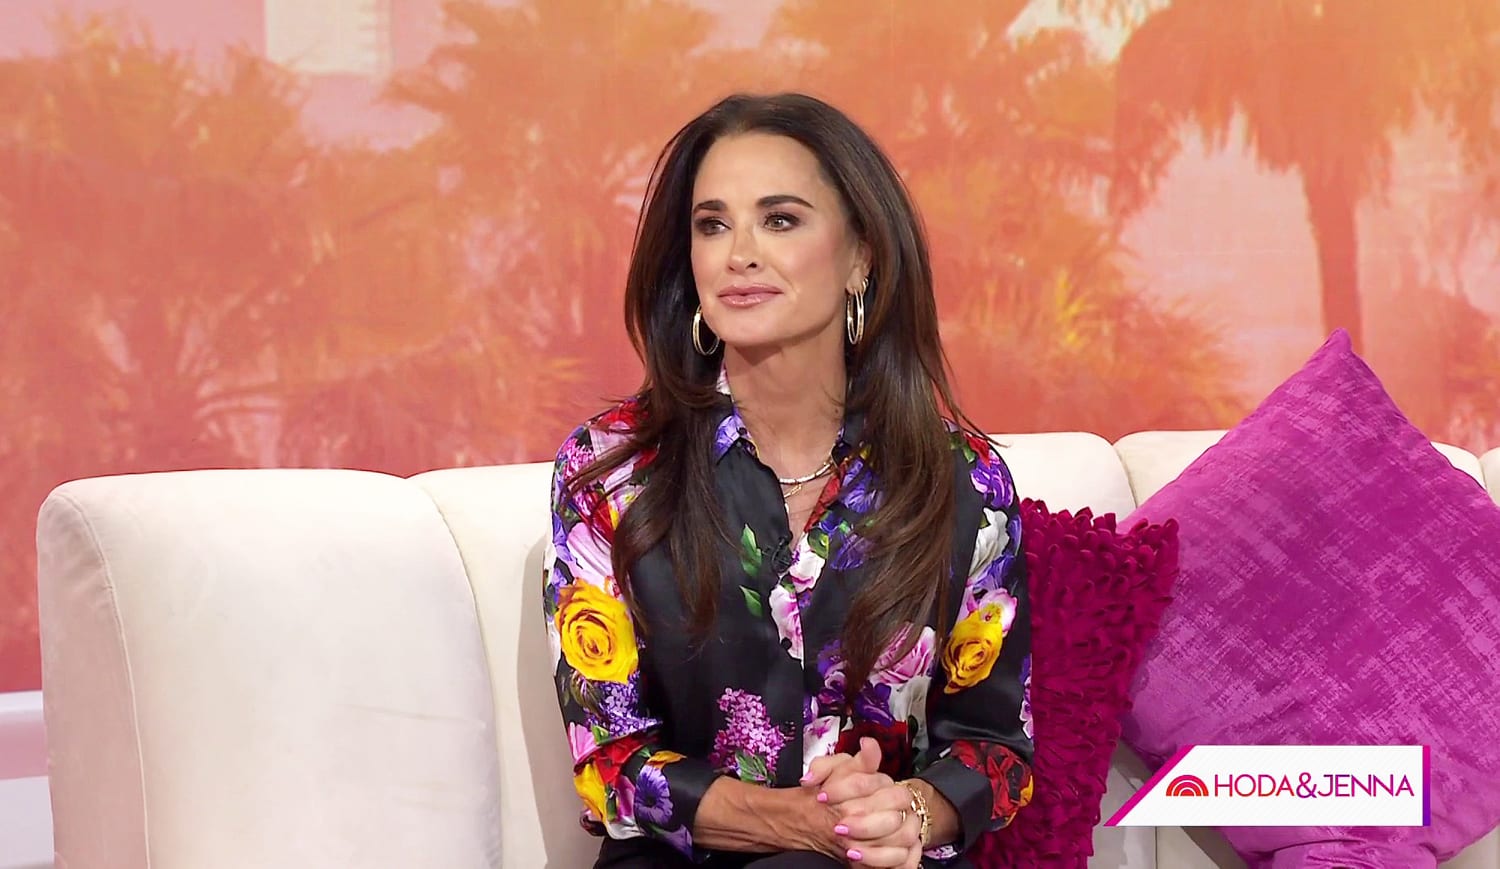 Kyle Richards says her daughters were a 'big deciding factor' in her separation